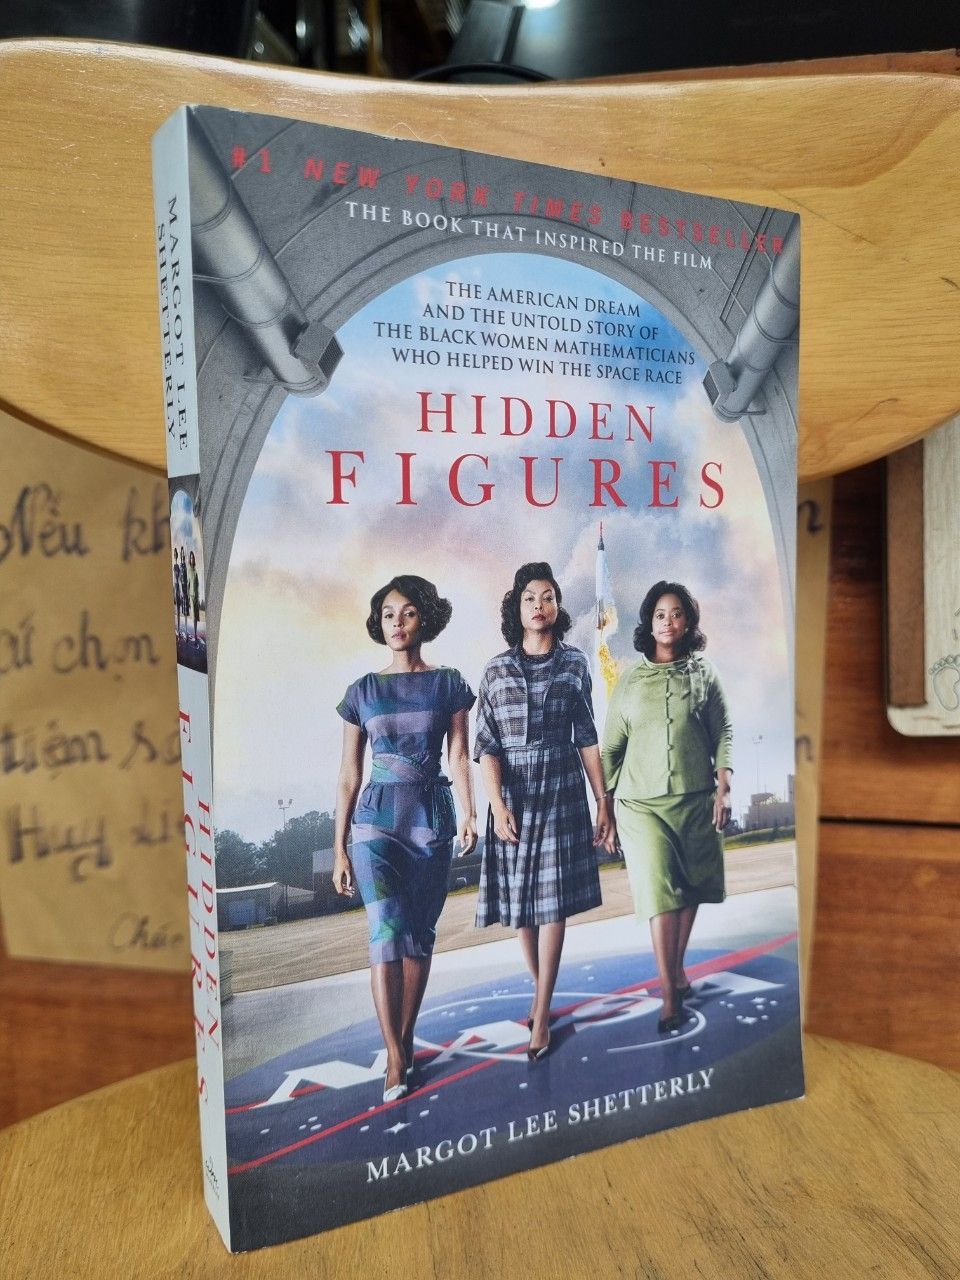  HIDDEN FIGURES: THE AMERICAN DREAM AND THE UNTOLD STORY OF THE BLACK WOMEN MATHEMATICIANS WHO HELPED WIN THE SPACE RACE - MARGOT LEE SHETTERLY 